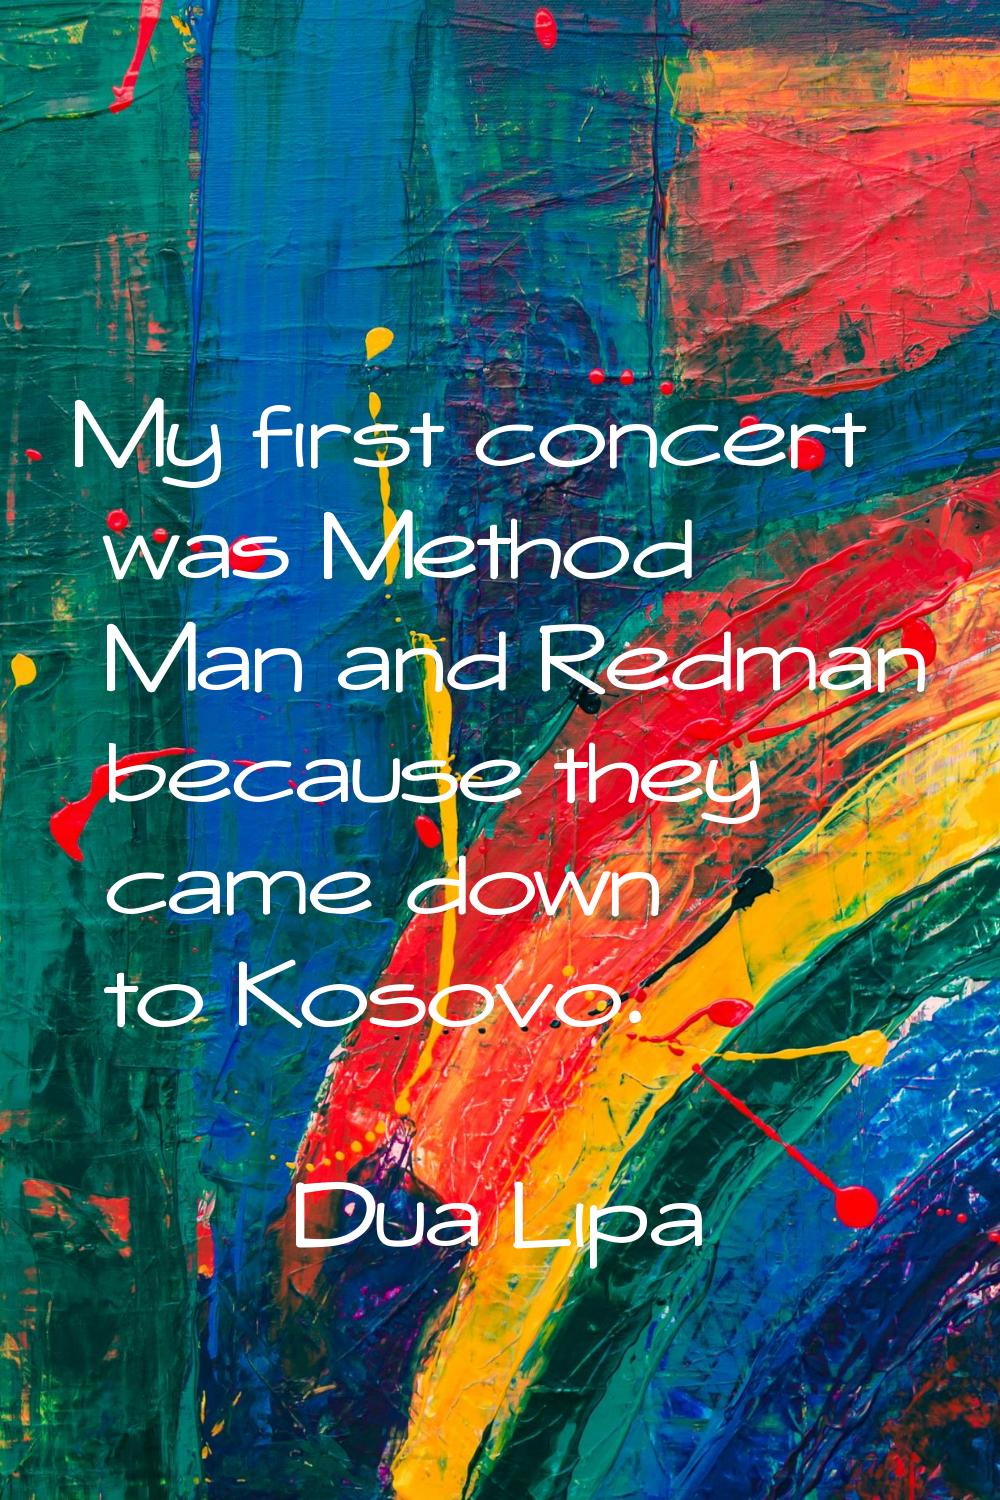 My first concert was Method Man and Redman because they came down to Kosovo.